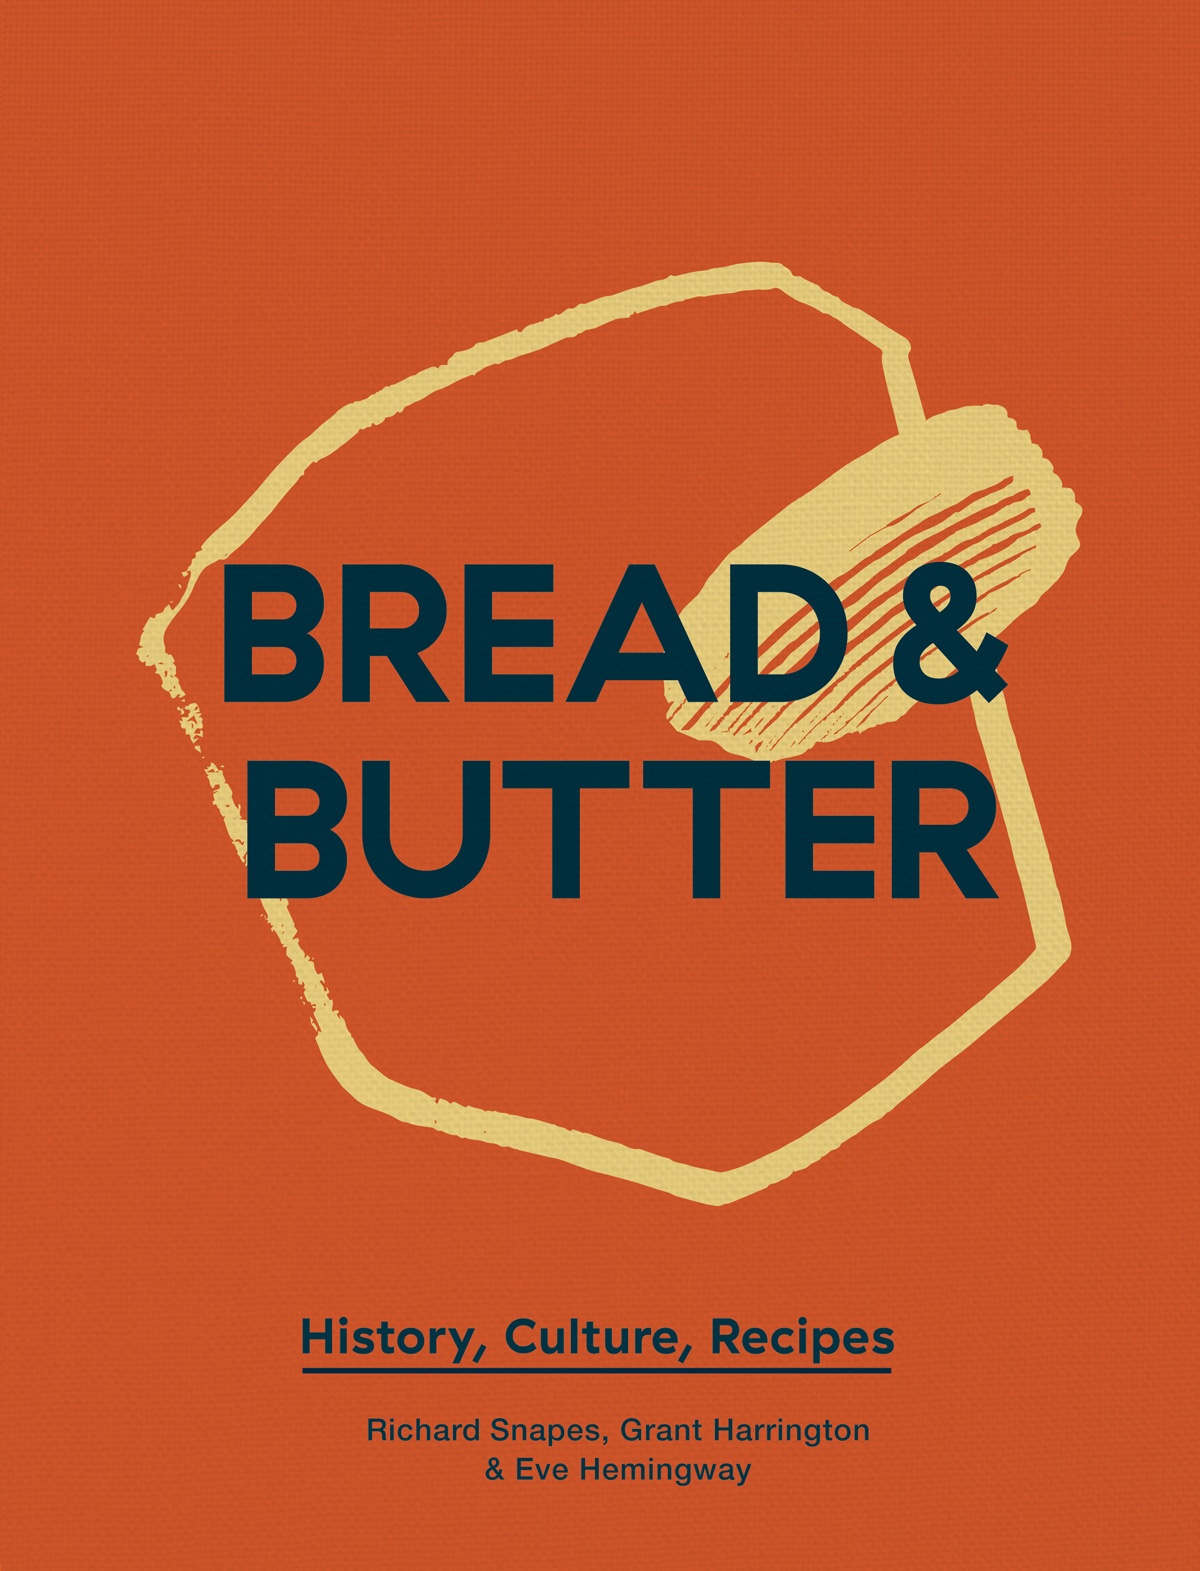 Book cover of Bread & Butter by Richard Snapes